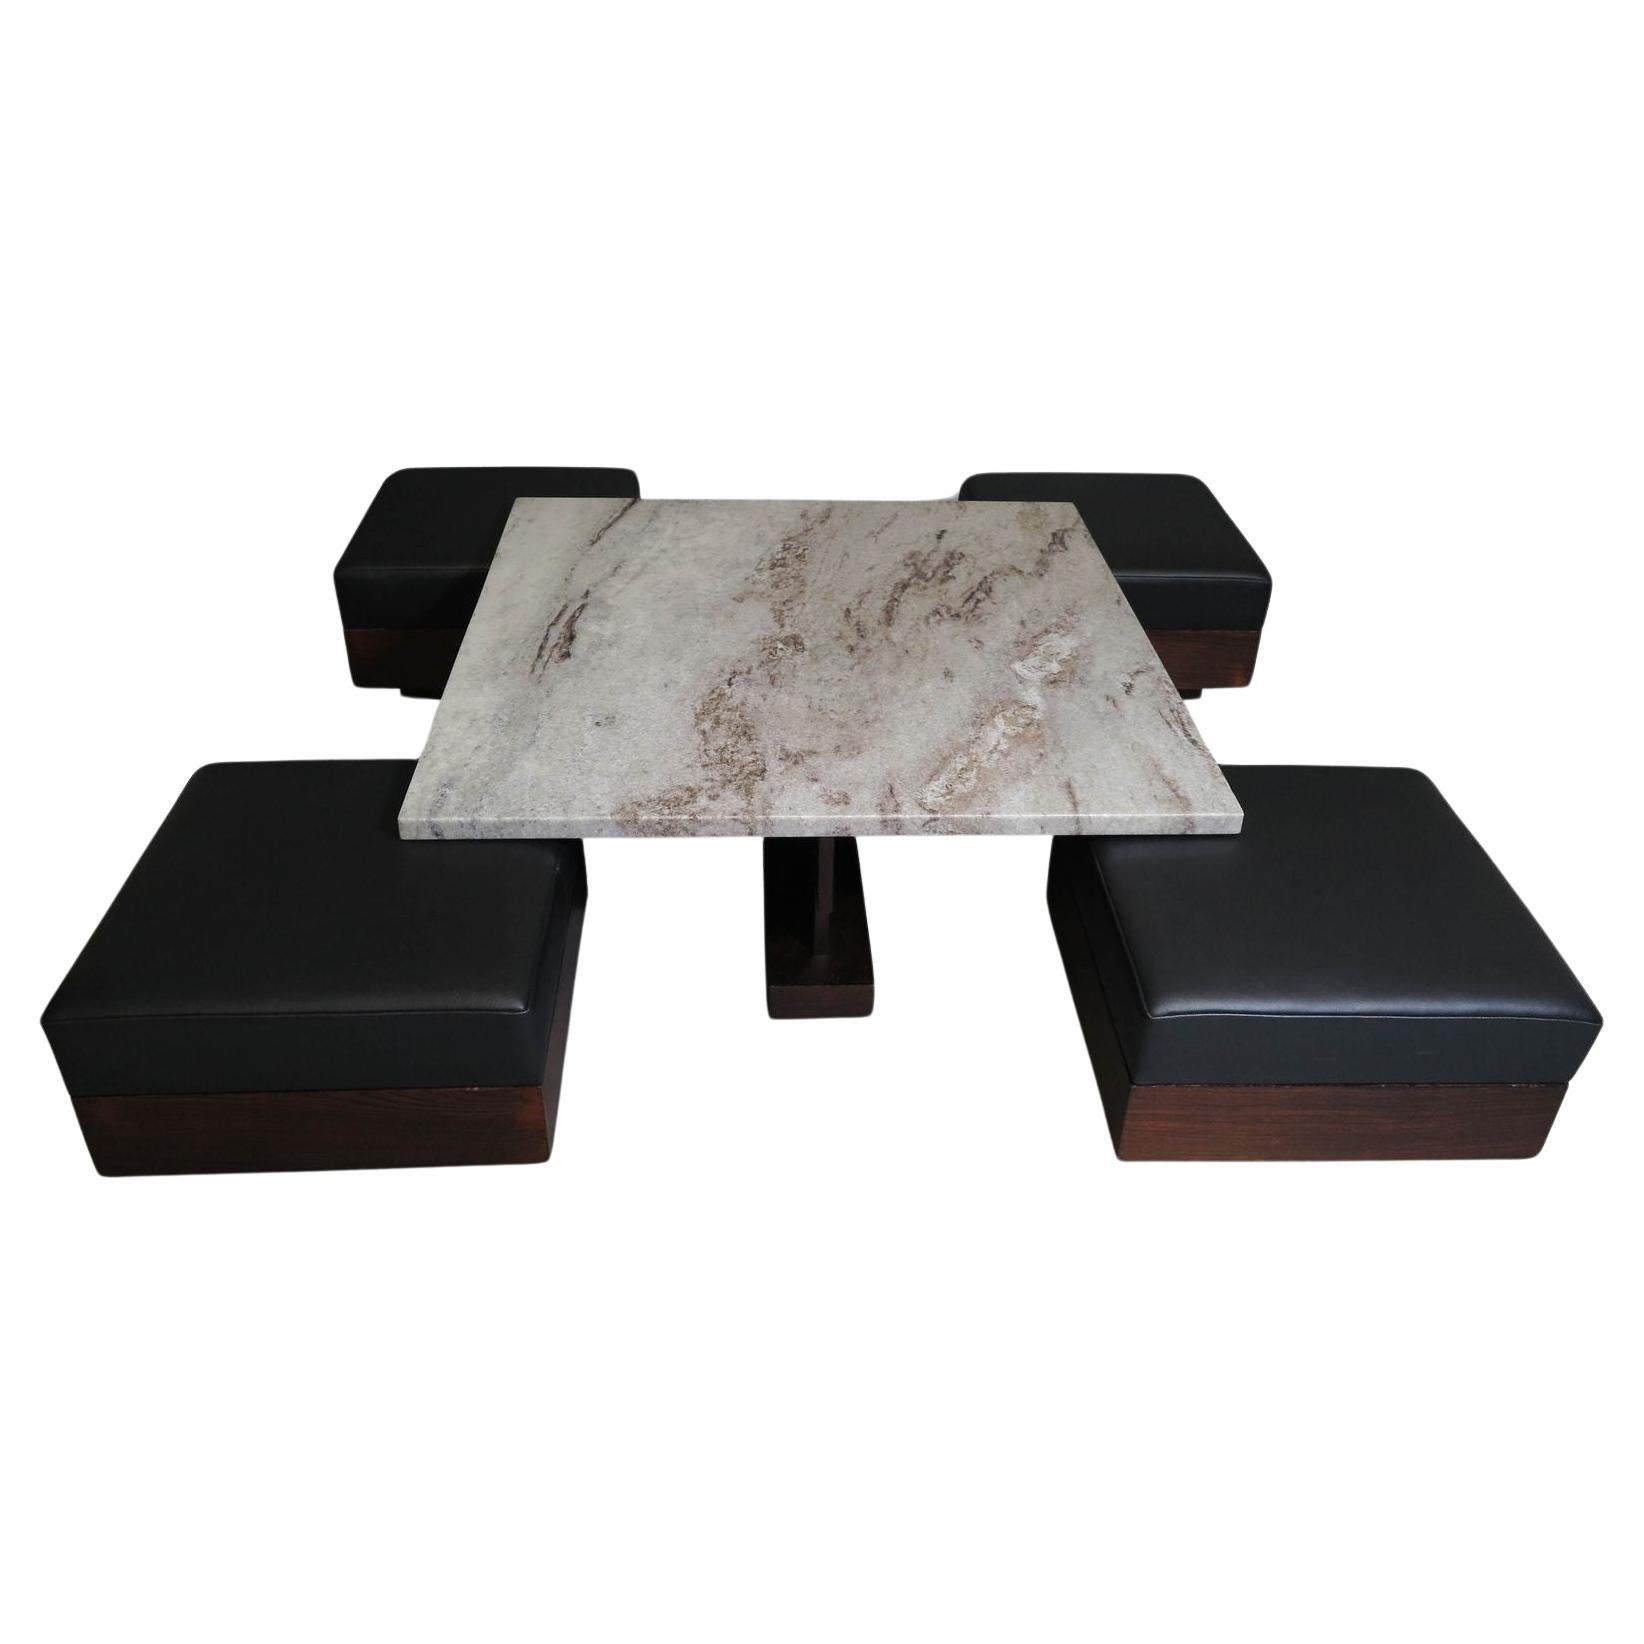 Celina Decorações Brazilian Modern Rosewood Coffee Table With Ottoman Benches For Sale